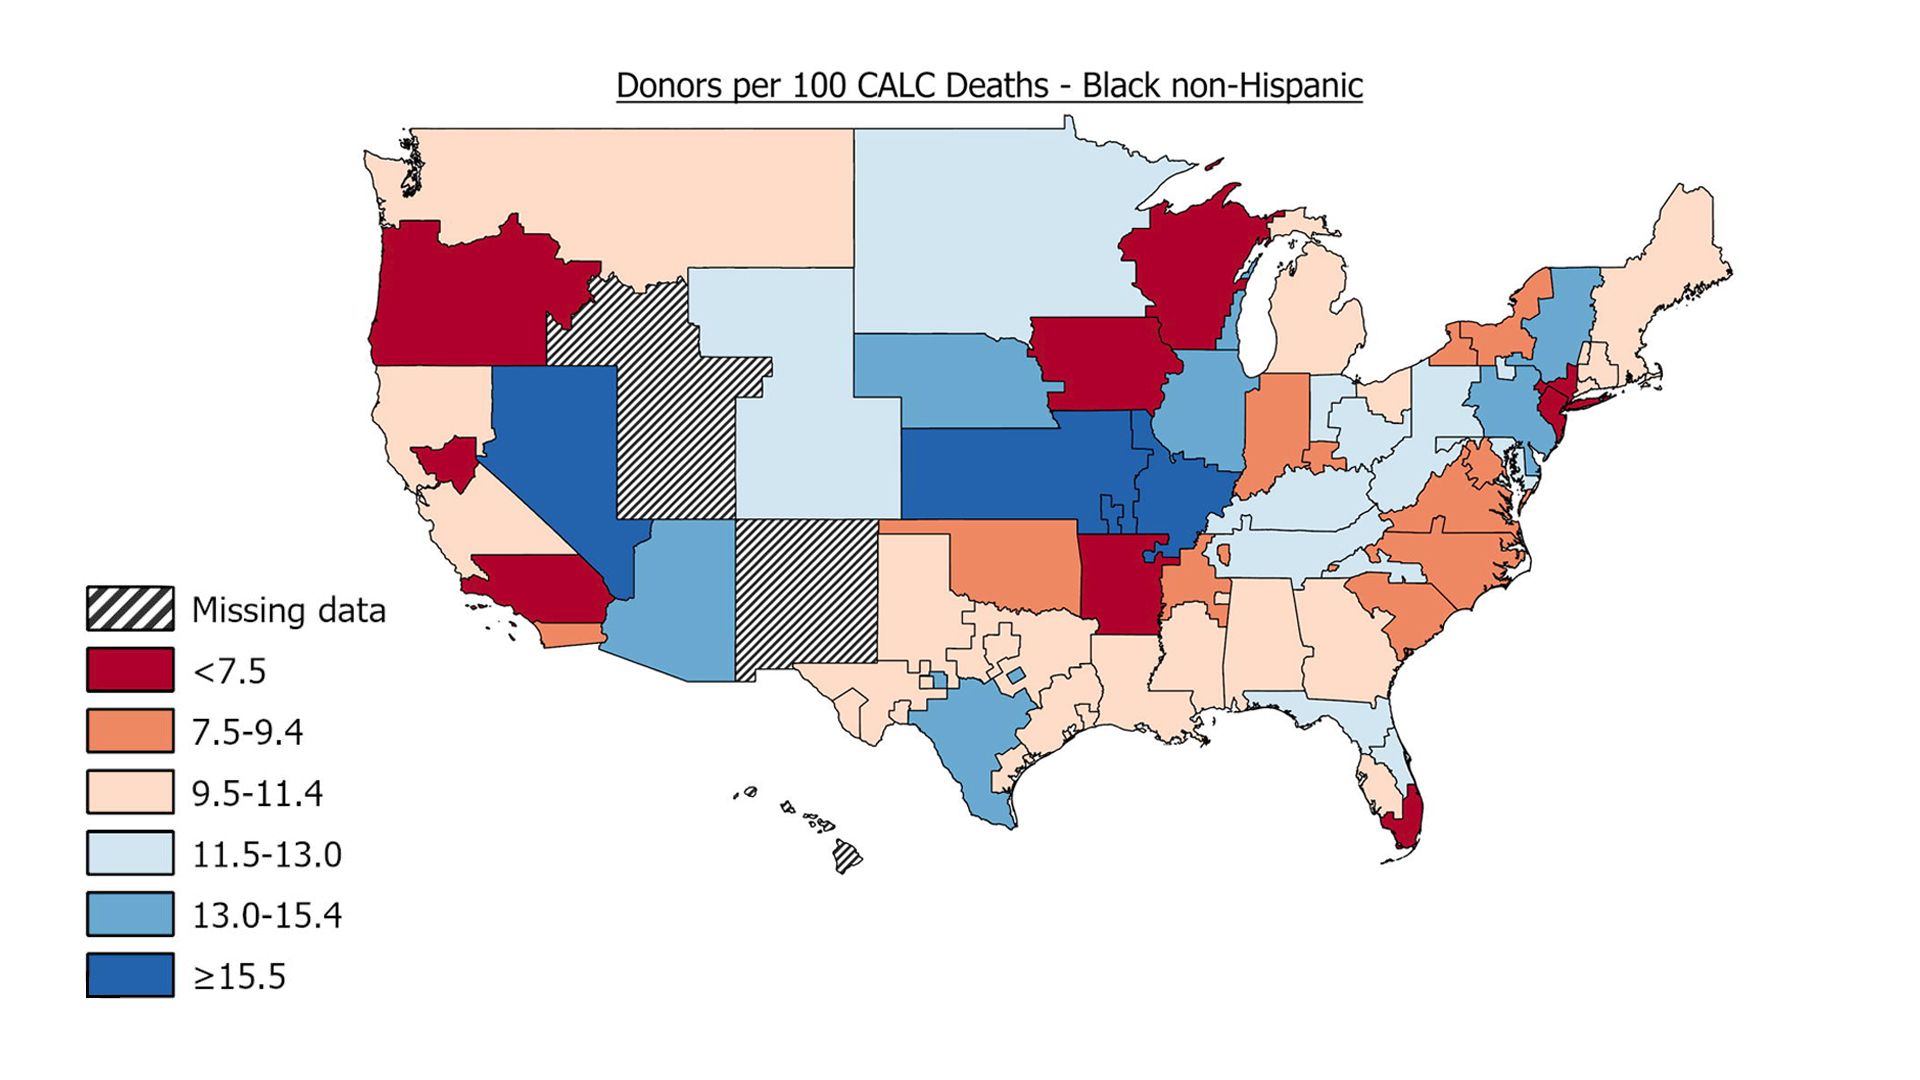 A map showing organ donors of Black people is typically poor performing due to poor outreach